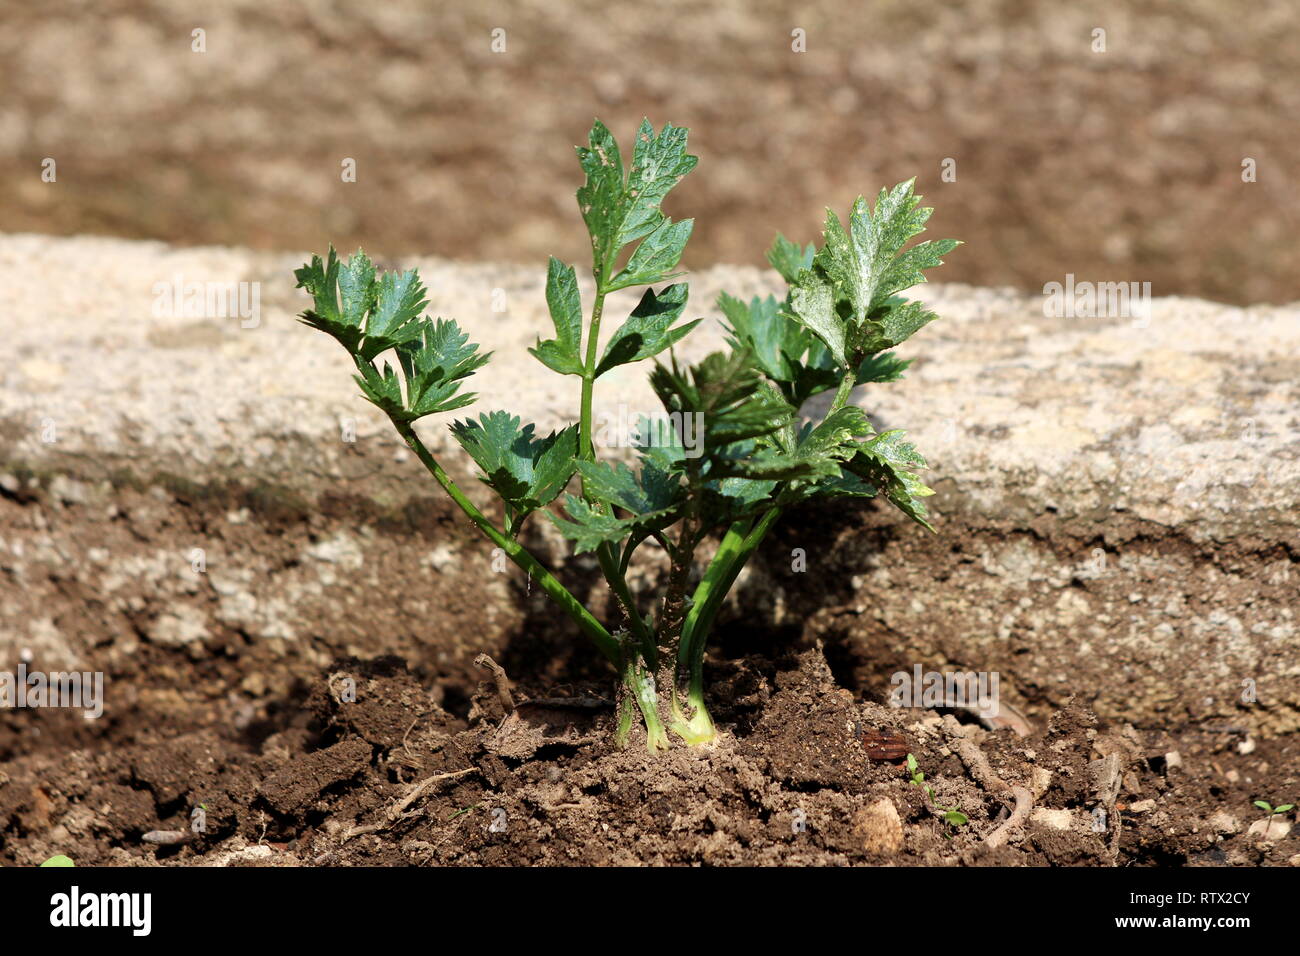 Celery or Apium graveolens marshland vegetable plant with long fibrous stalk tapering into leaves planted in local garden surrounded with wet soil Stock Photo